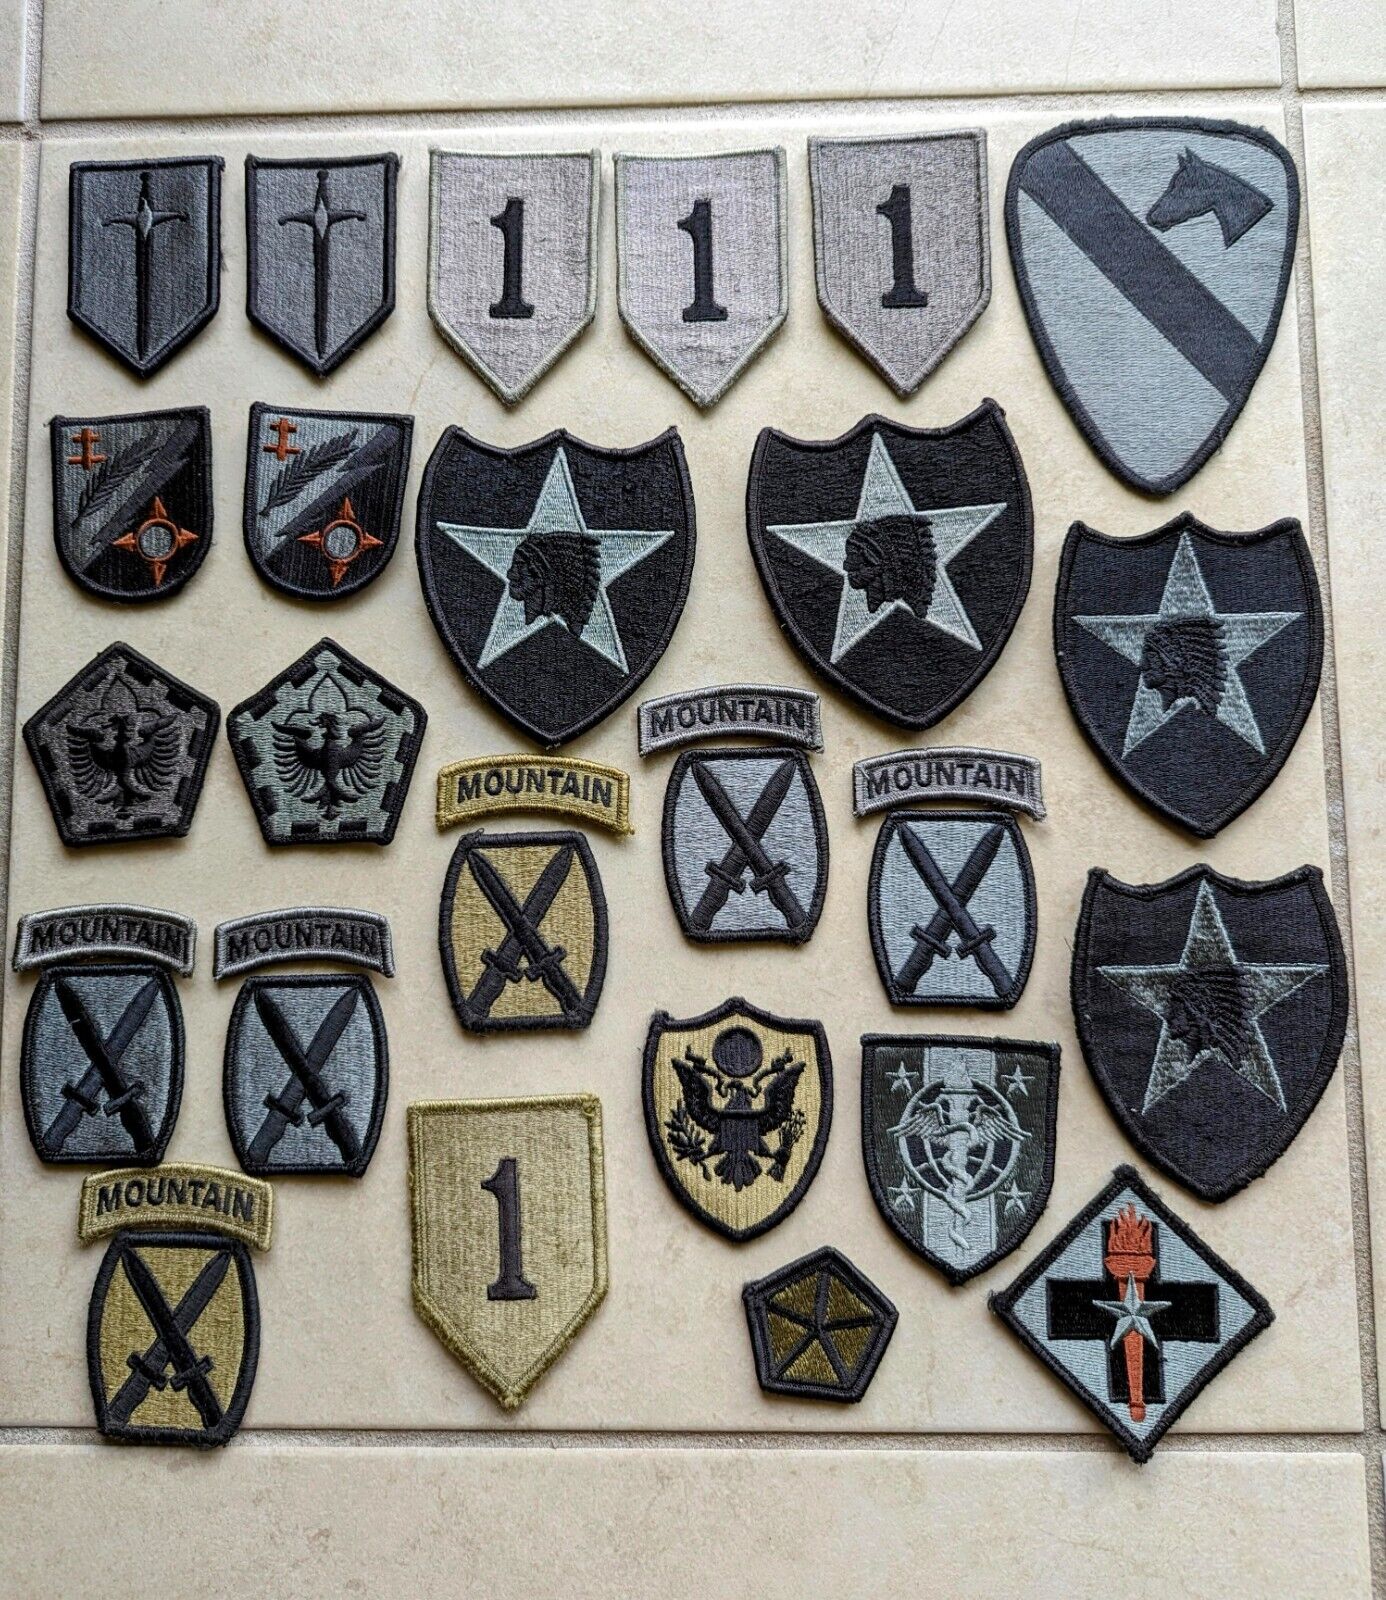 MISCELLANEOUS ARMY MILITARY UNIT SHOULDER PATCHES OCP ACU hook loop Lots of 25